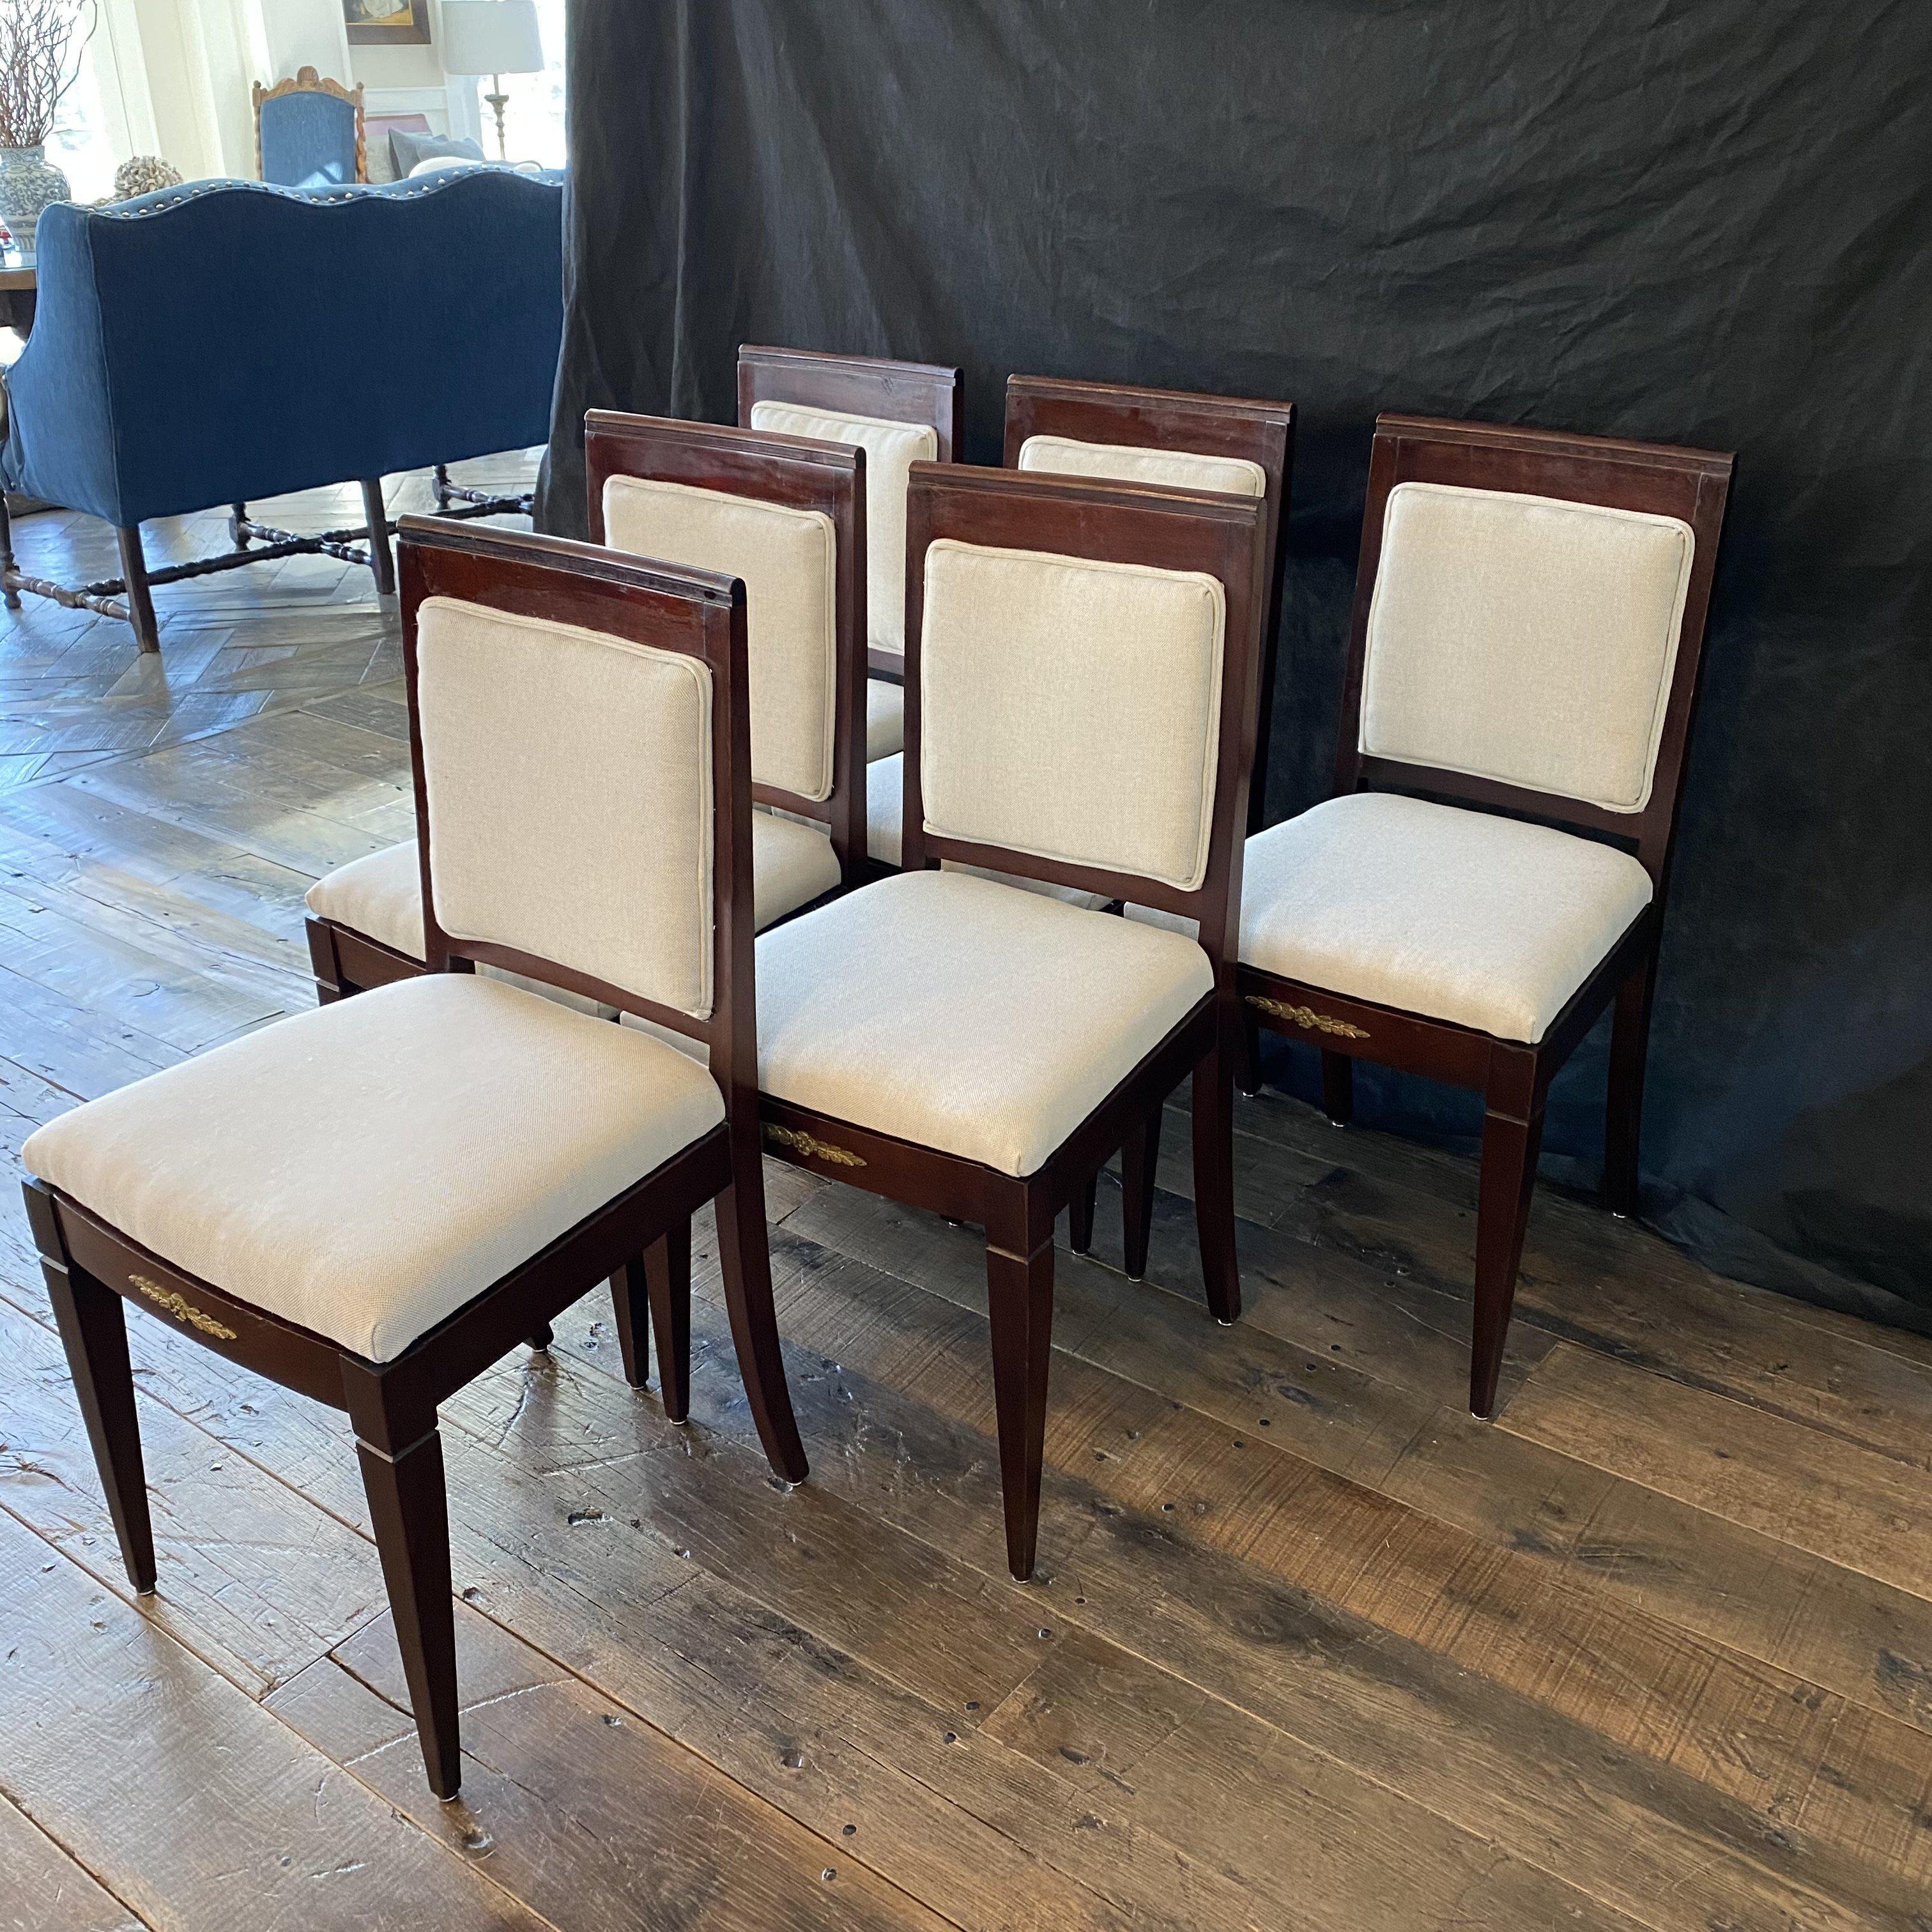 Elegant and sophisticated set of six French Empire style fauteuil side dining chairs are crafted from mahogany with ormolu mounts and new cream upholstery. The chairs feature tapering square profile legs and aprons decorated with neoclassical ormolu